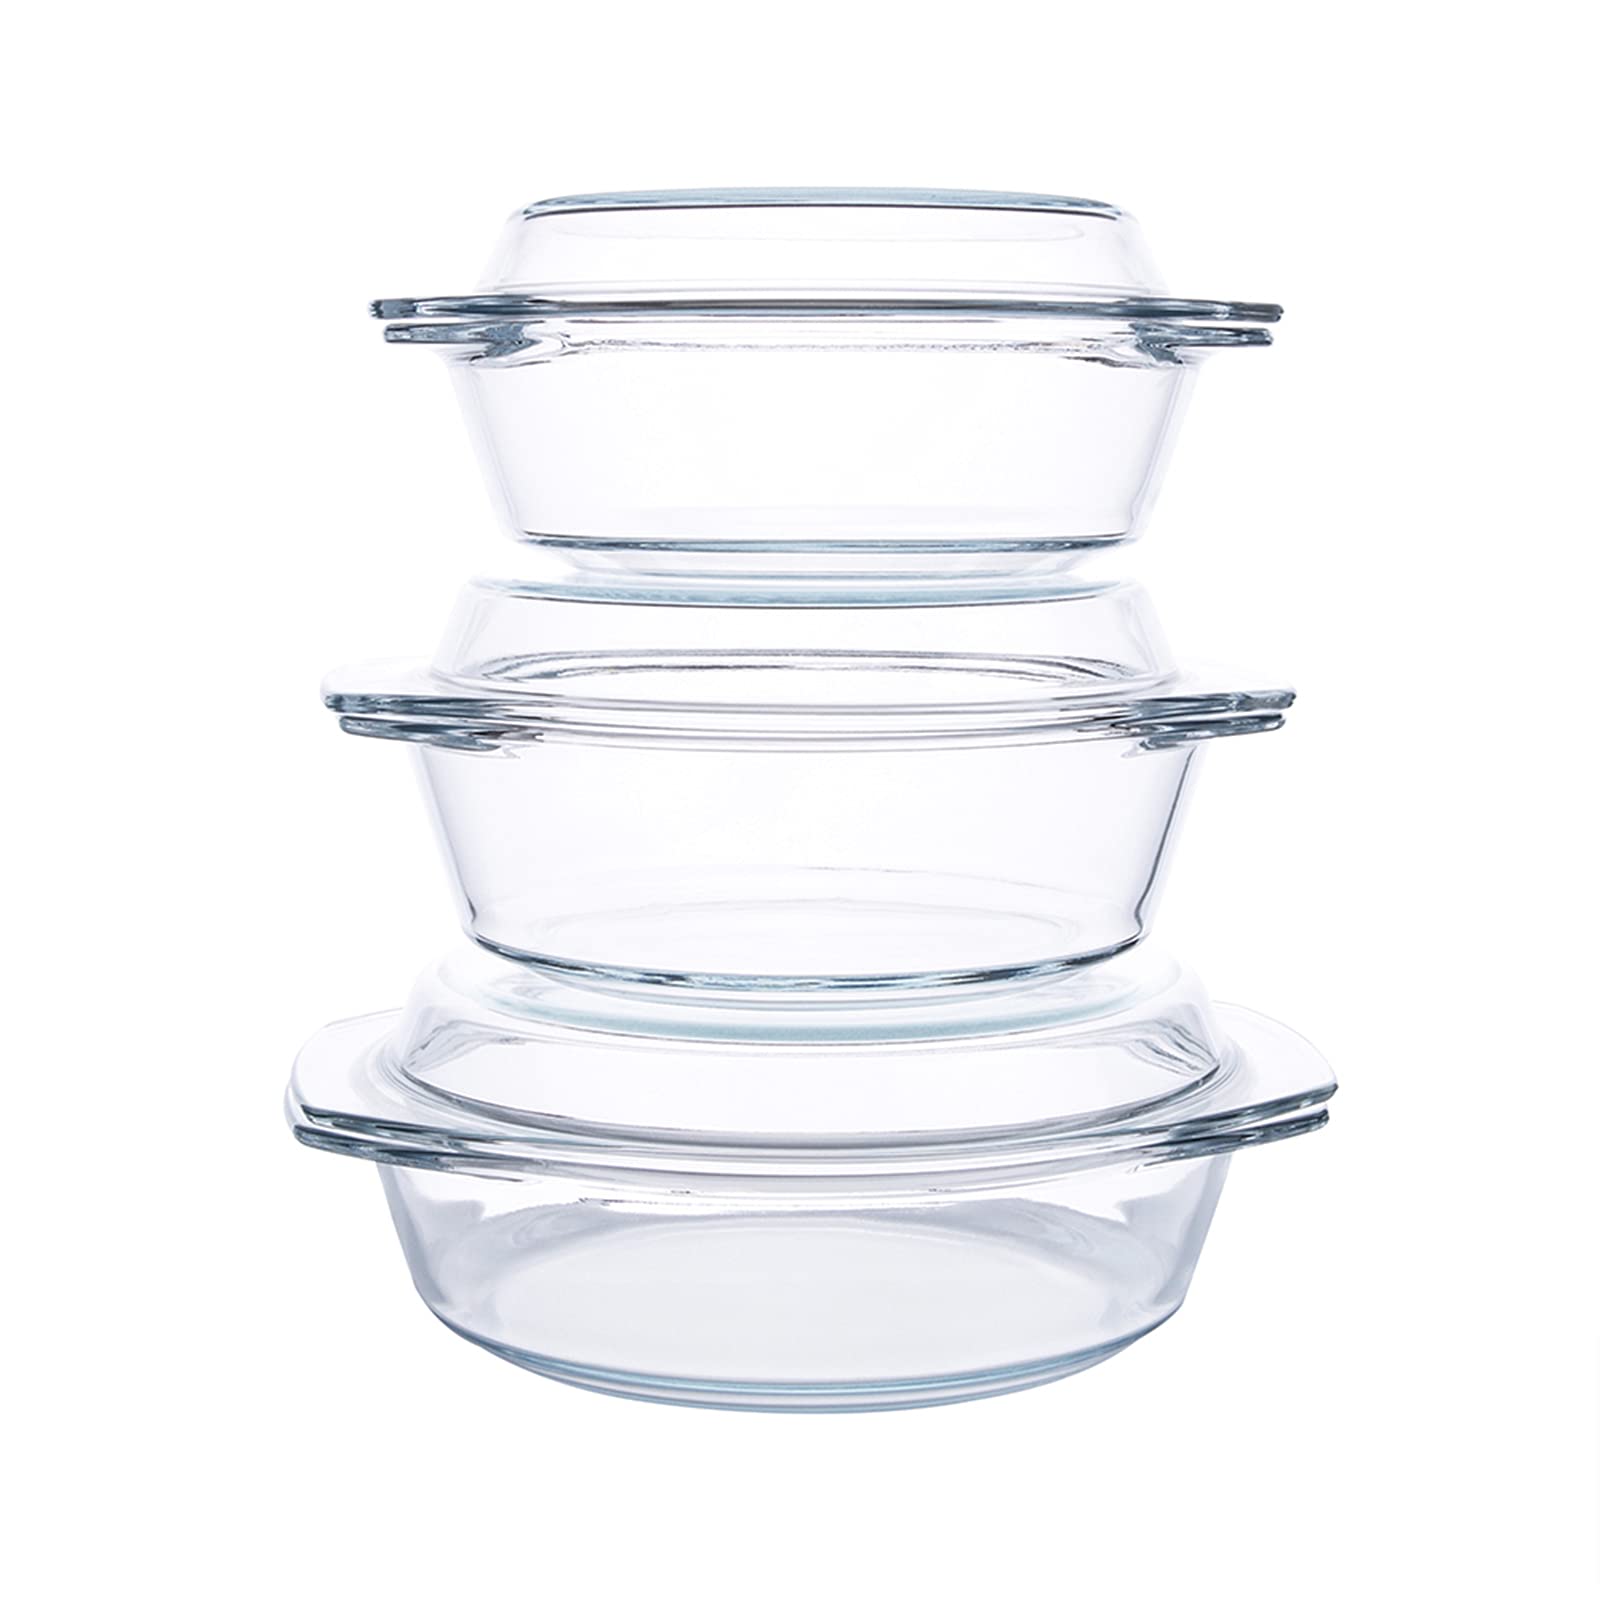 HUSANMP Set of 6 Pieces Round Tempered glass casserole Dish with Lids, glass casserole Baking Dish Set for Oven, Freezer and Dis